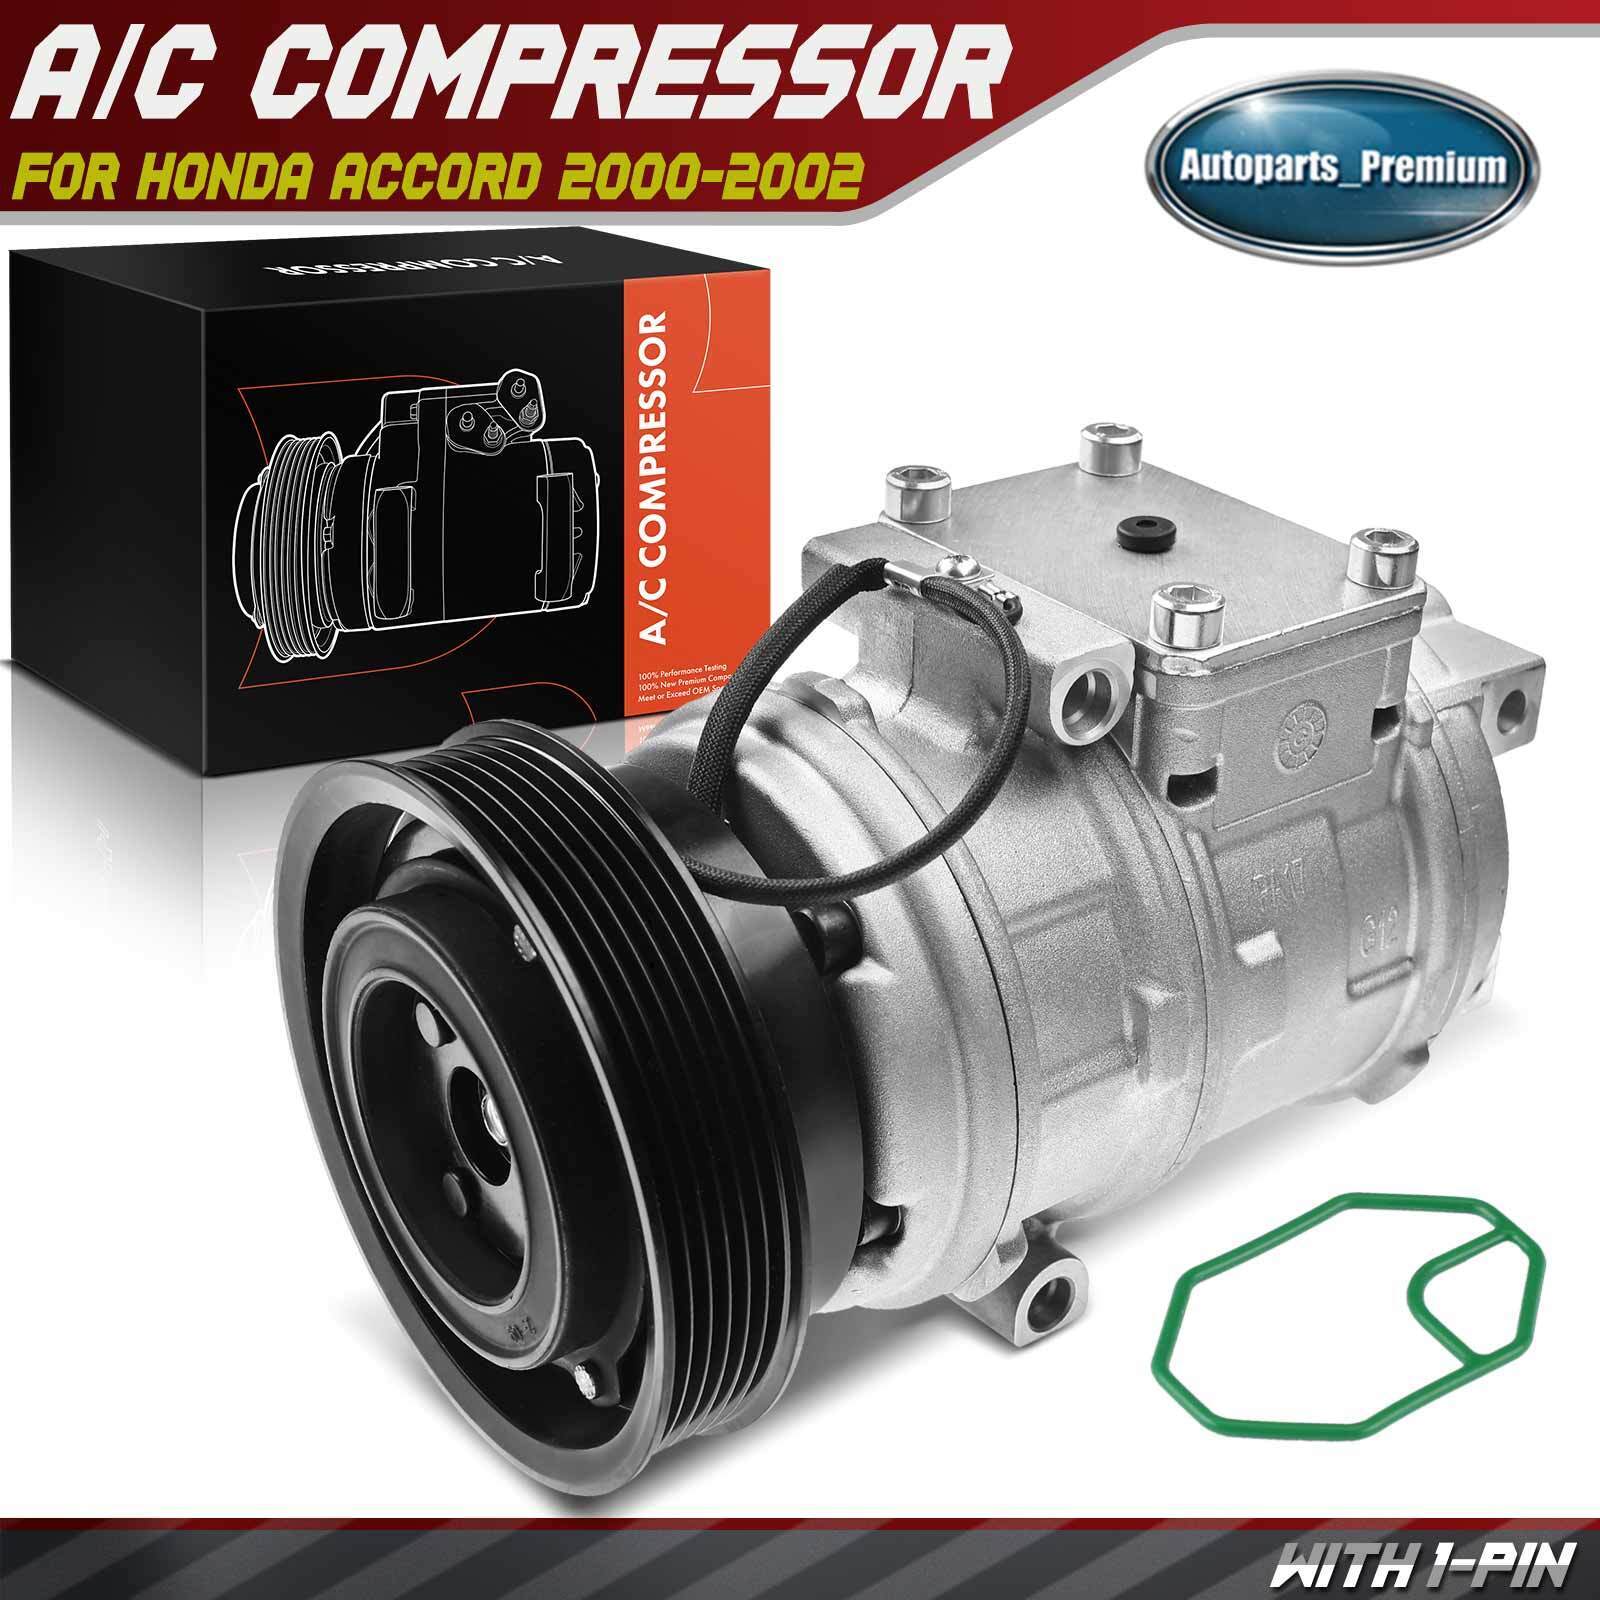 New AC Compressor with Clutch for Honda Accord 1998-2002 Acura CL 1997-1999 3.0L